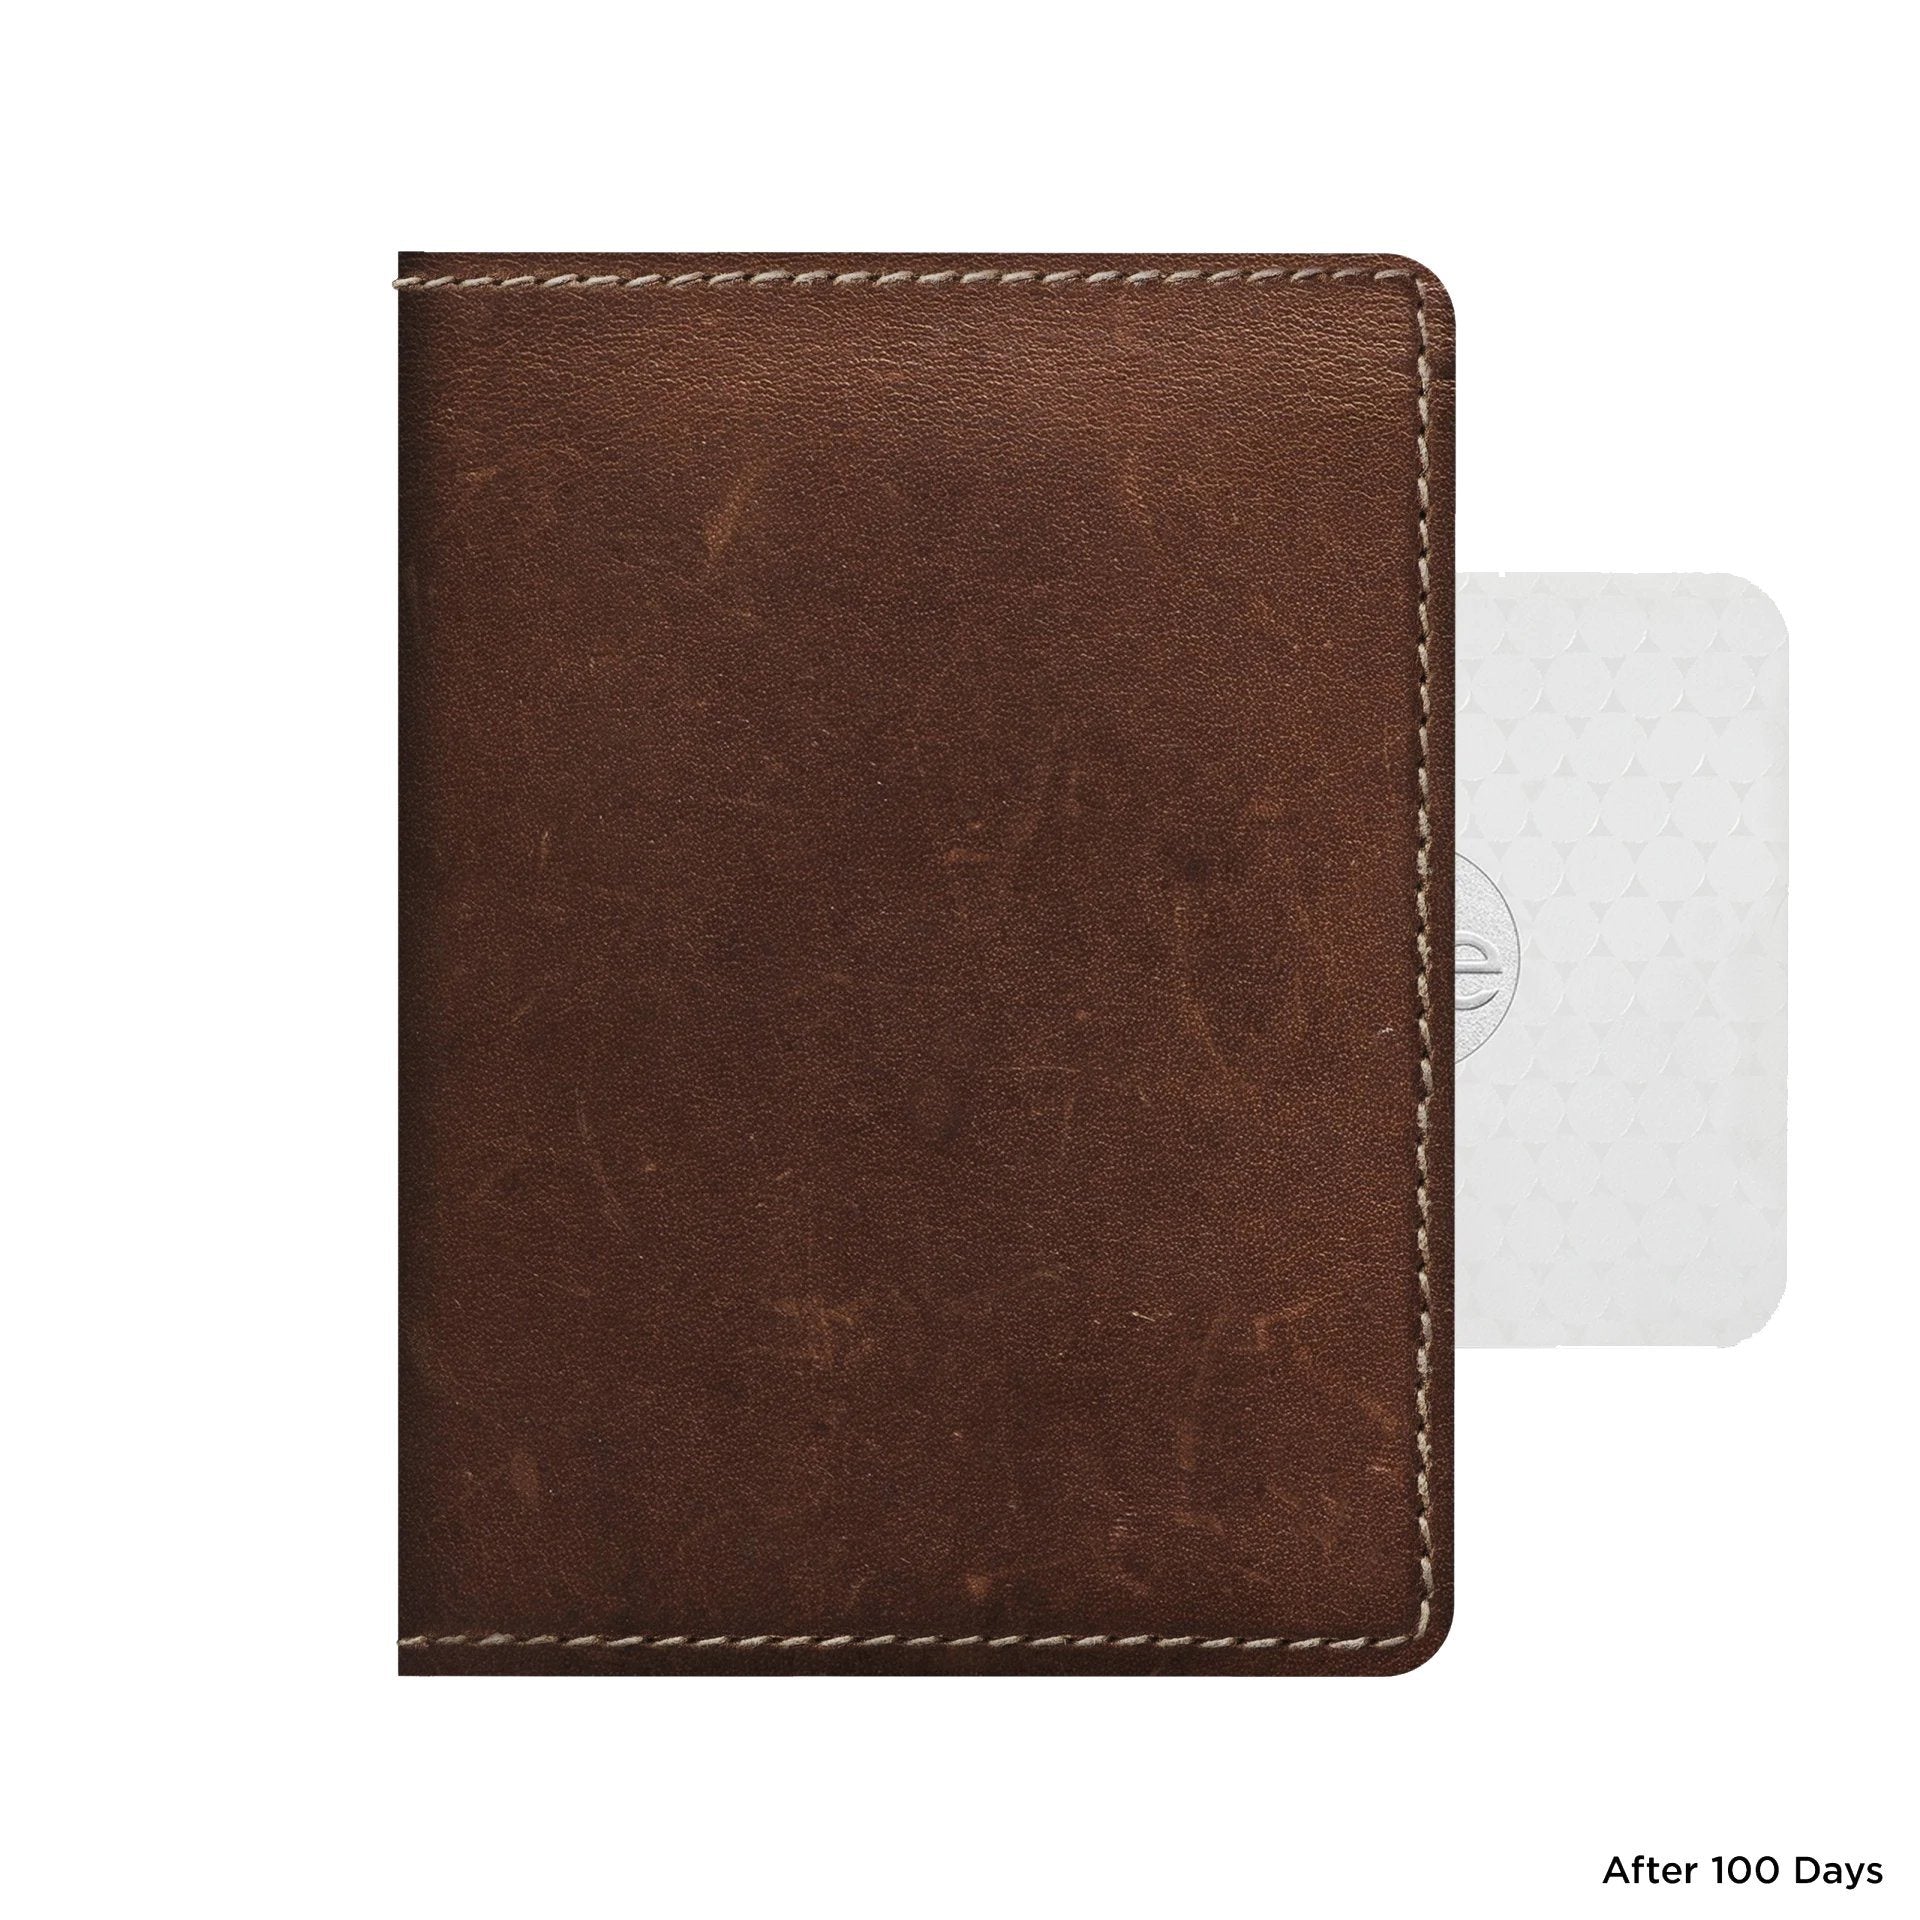 NOMAD Slim Horween Leather Wallet with Tile Tracking, Rustic Brown Wallet NOMAD 